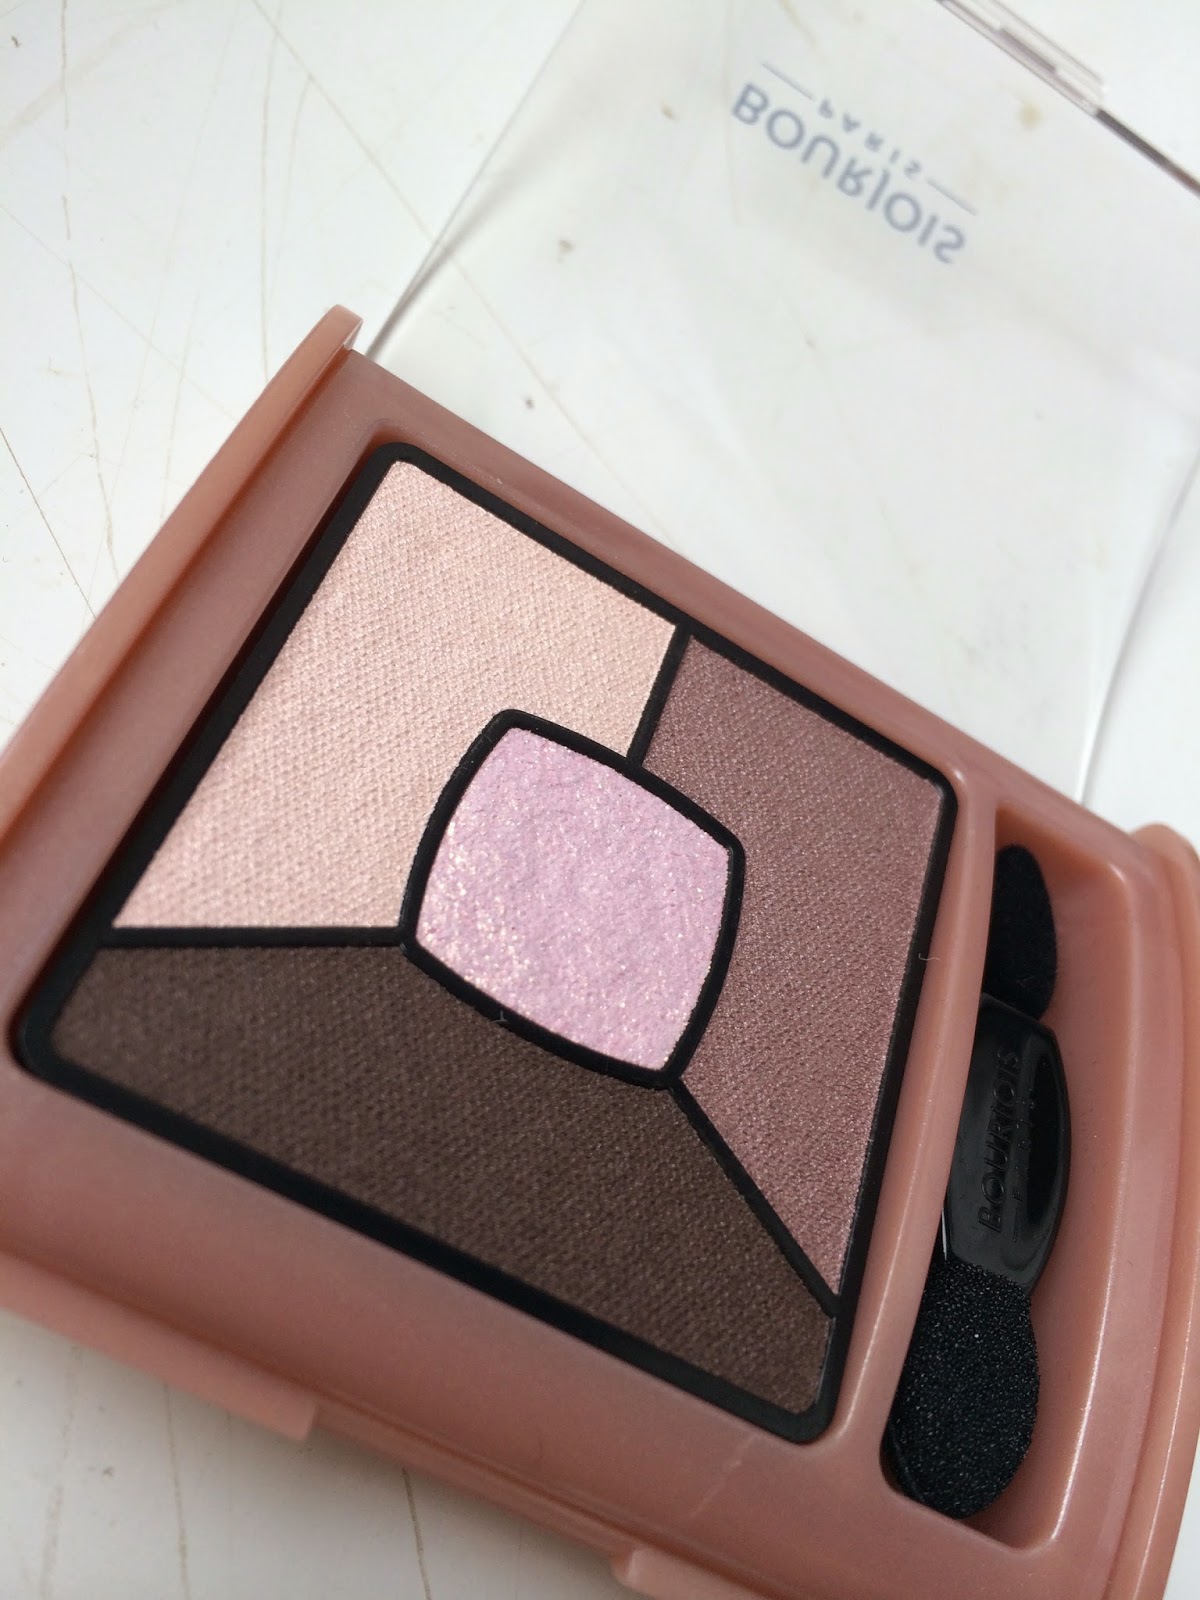 Bourjois-Quad-Smoky-Stories-eyeshadow-over-rose-review